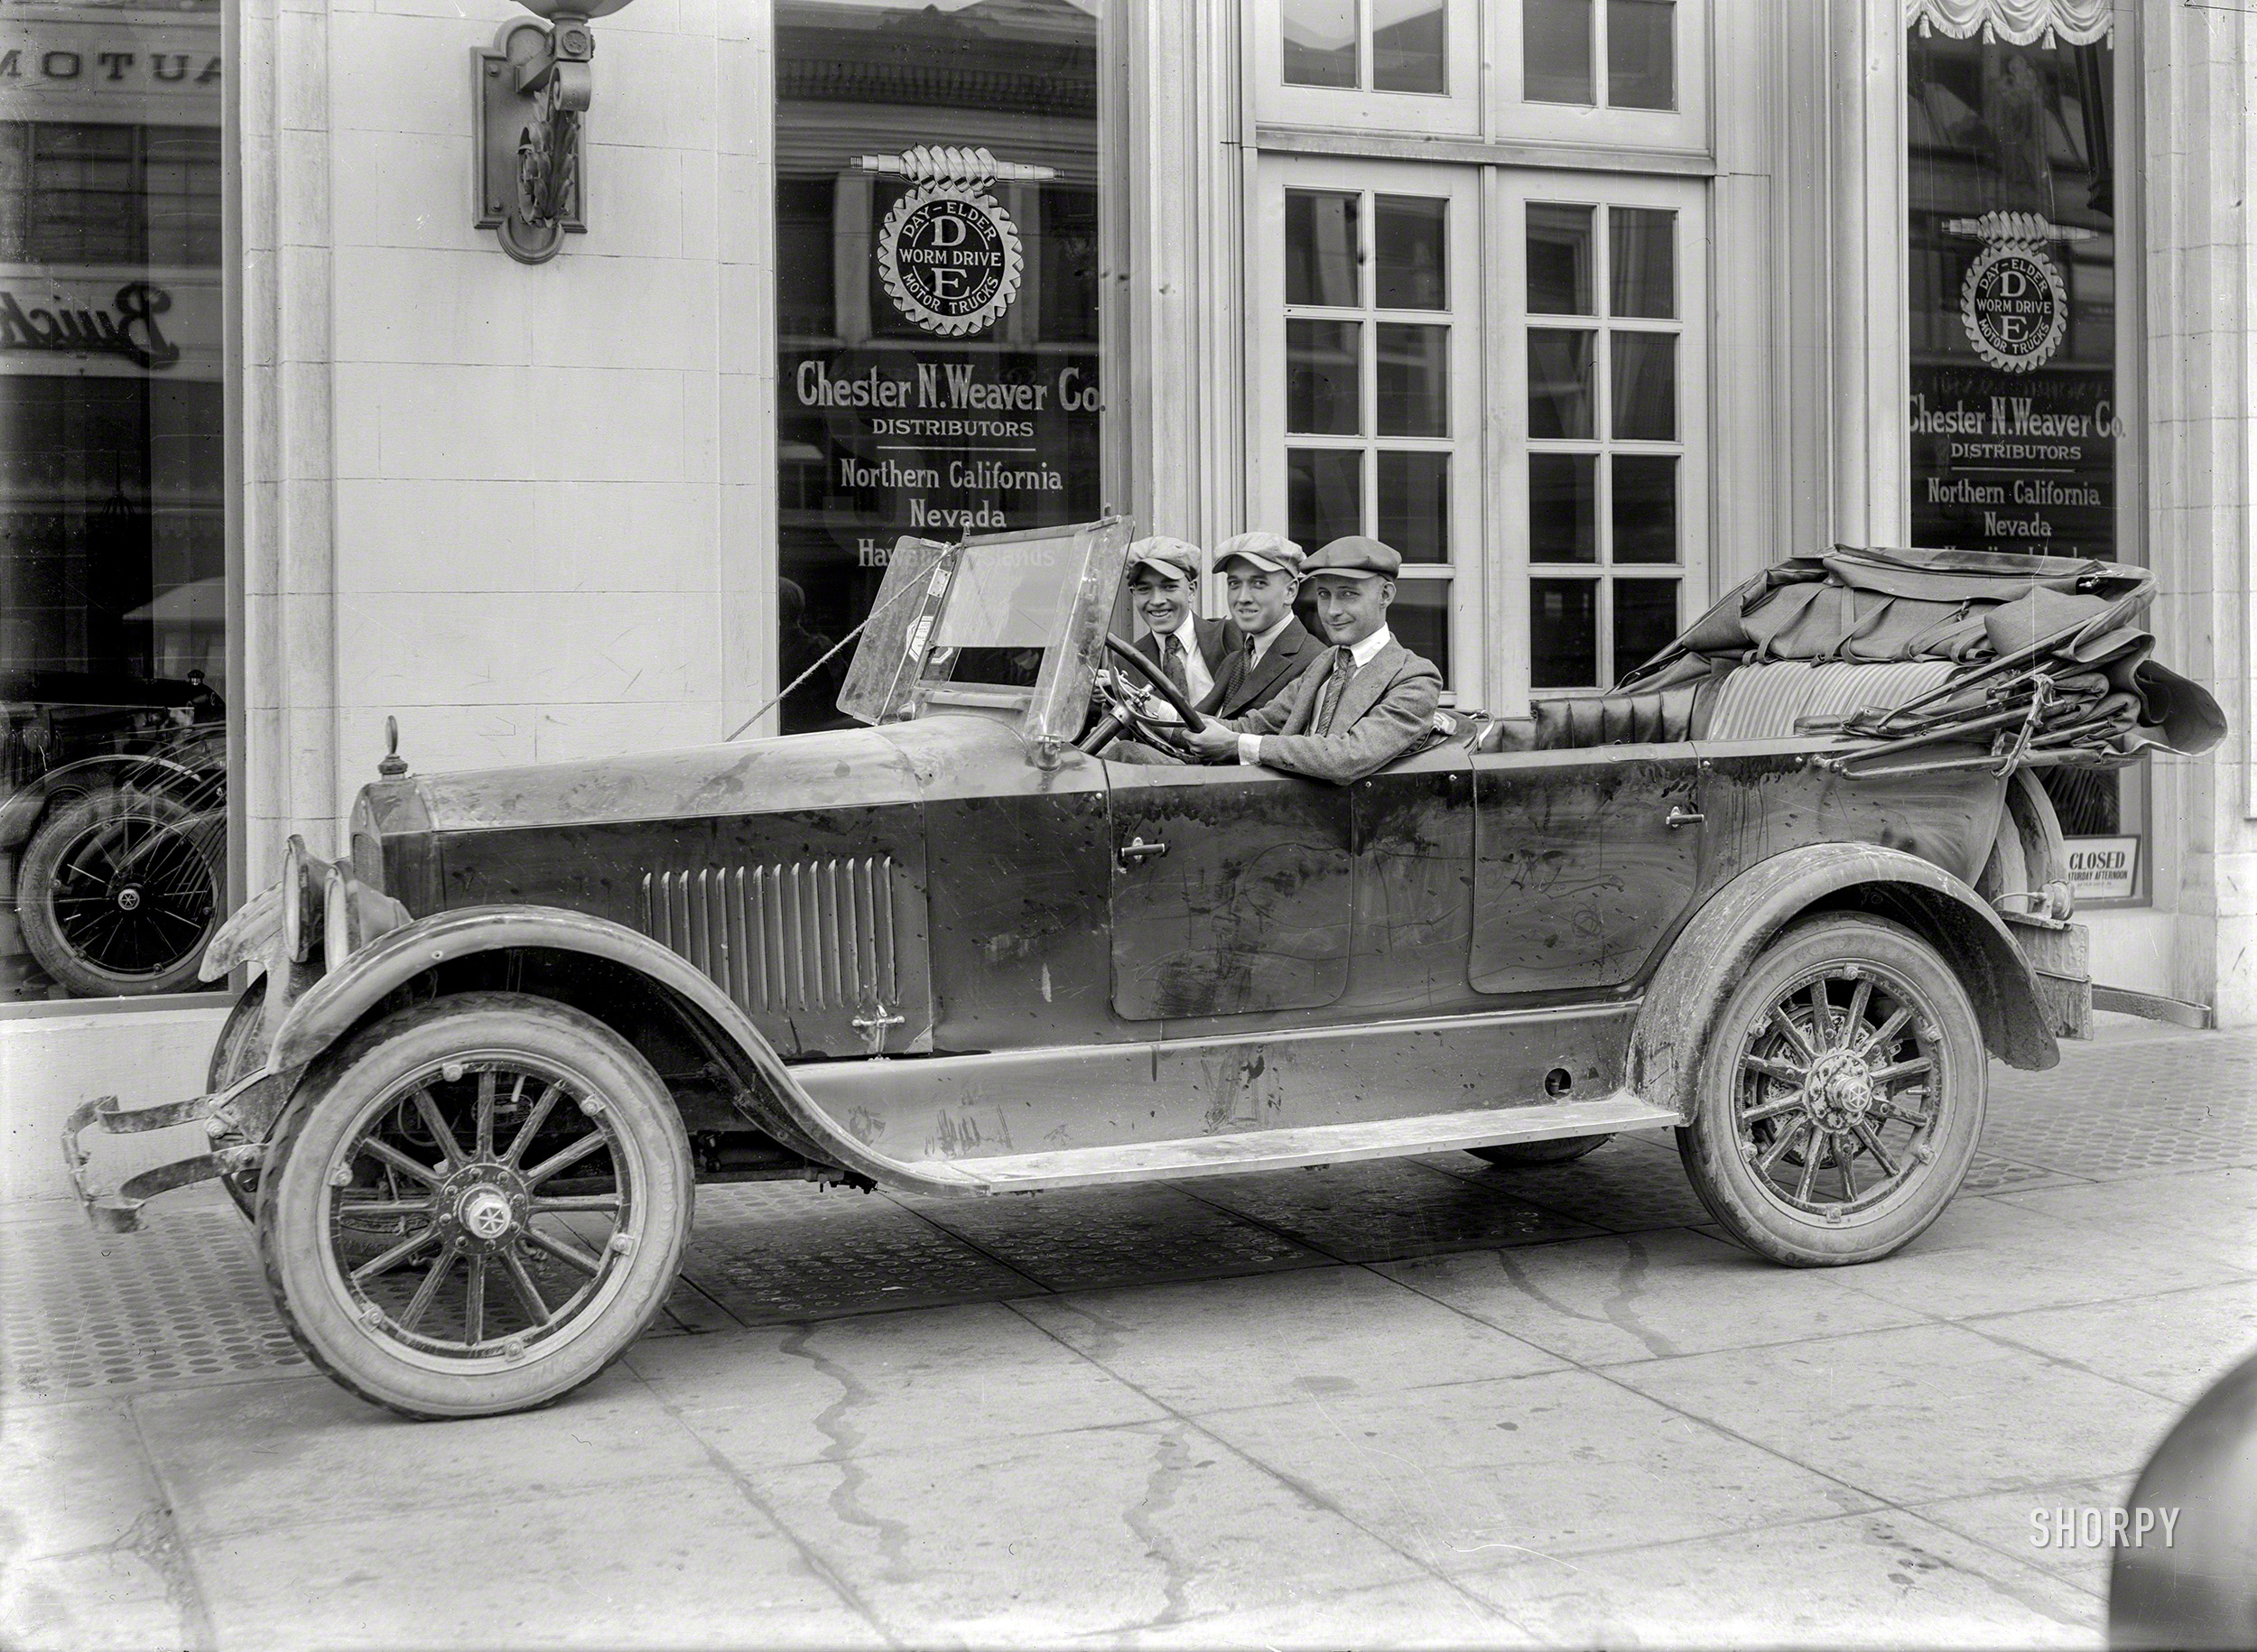 San Francisco circa 1920. Three gents in a dusty touring car with Arkansas and Colorado tags (and Yellowstone National Park windshield pass) are the stars of this 5x7 glass negative with the caption "Studebaker. Chester N. Weaver Co., S.E. corner Van Ness & California. Remodeled and occupied by Crocker-Citizens' Bank in 1967." Photo by Christopher Helin. View full size.